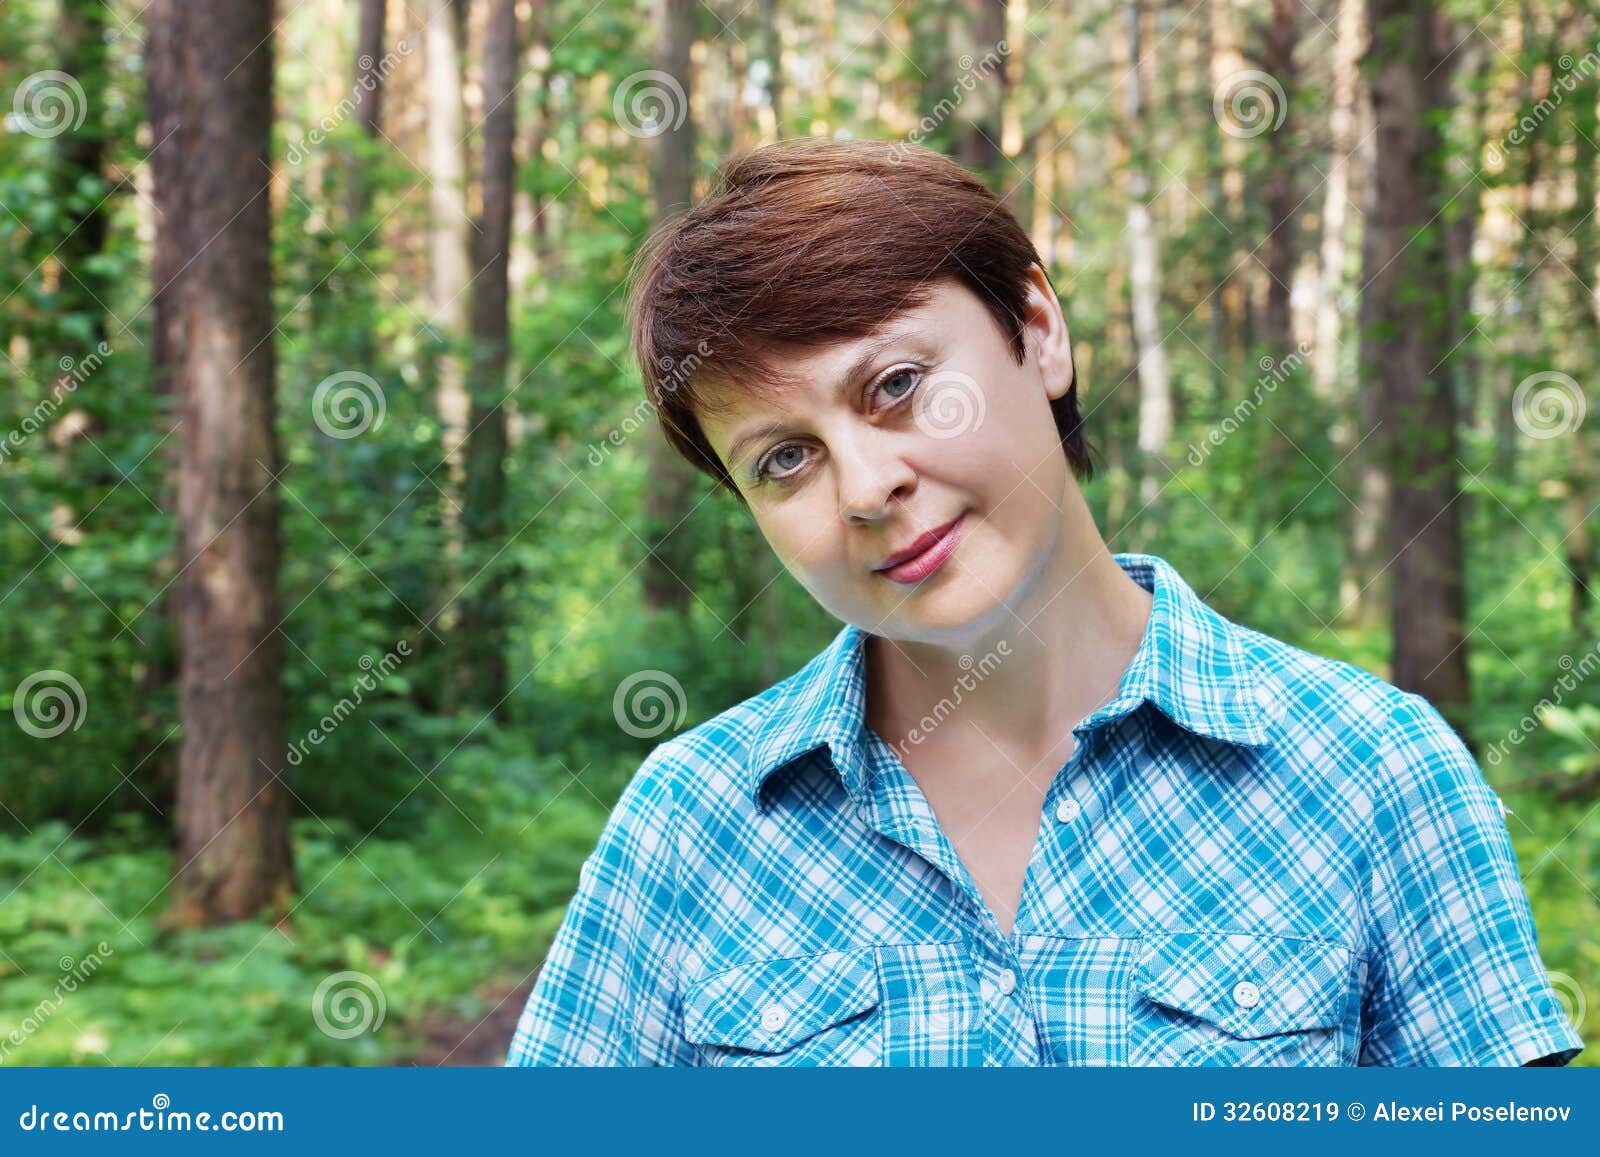 Portrait of a Woman in the Pine Forest Stock Image - Image of person ...